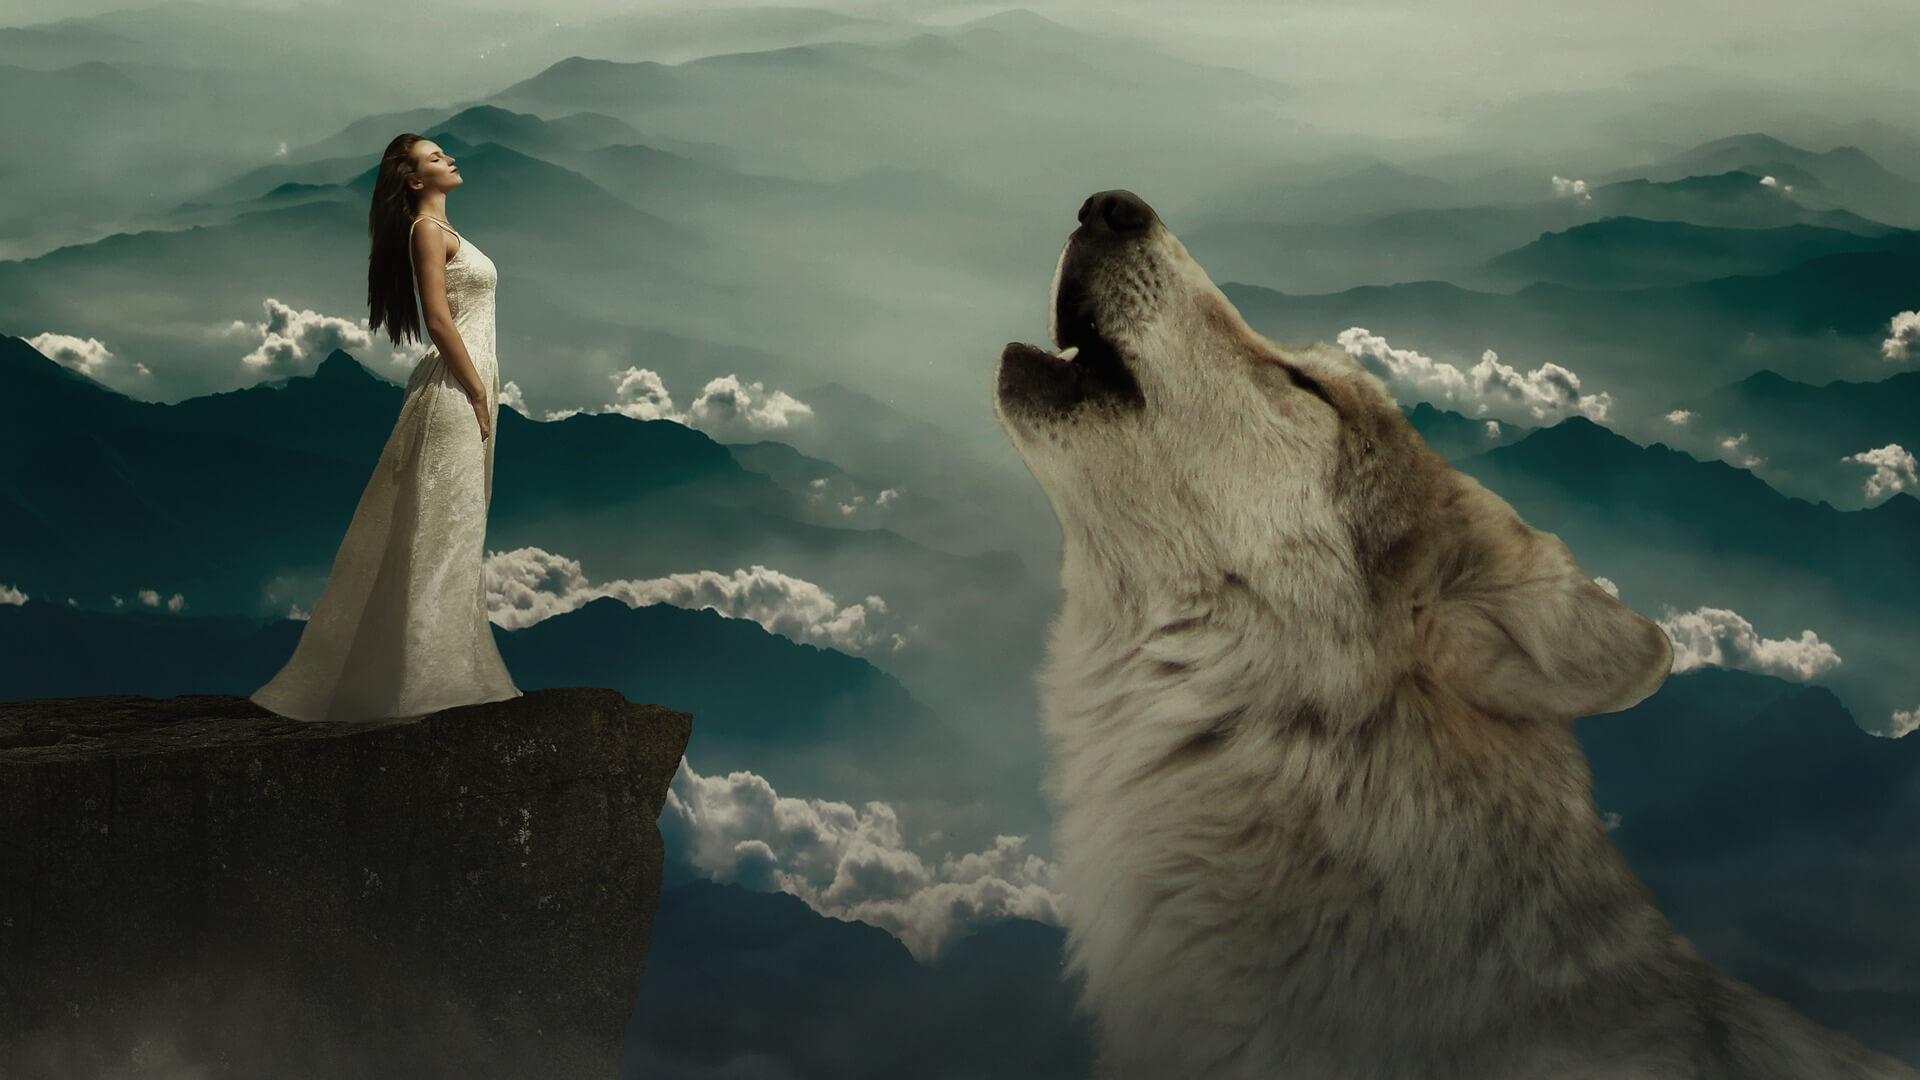 woman in white standing on the edge of a cliff opposite a howling wolf surrounded by hot air balloons